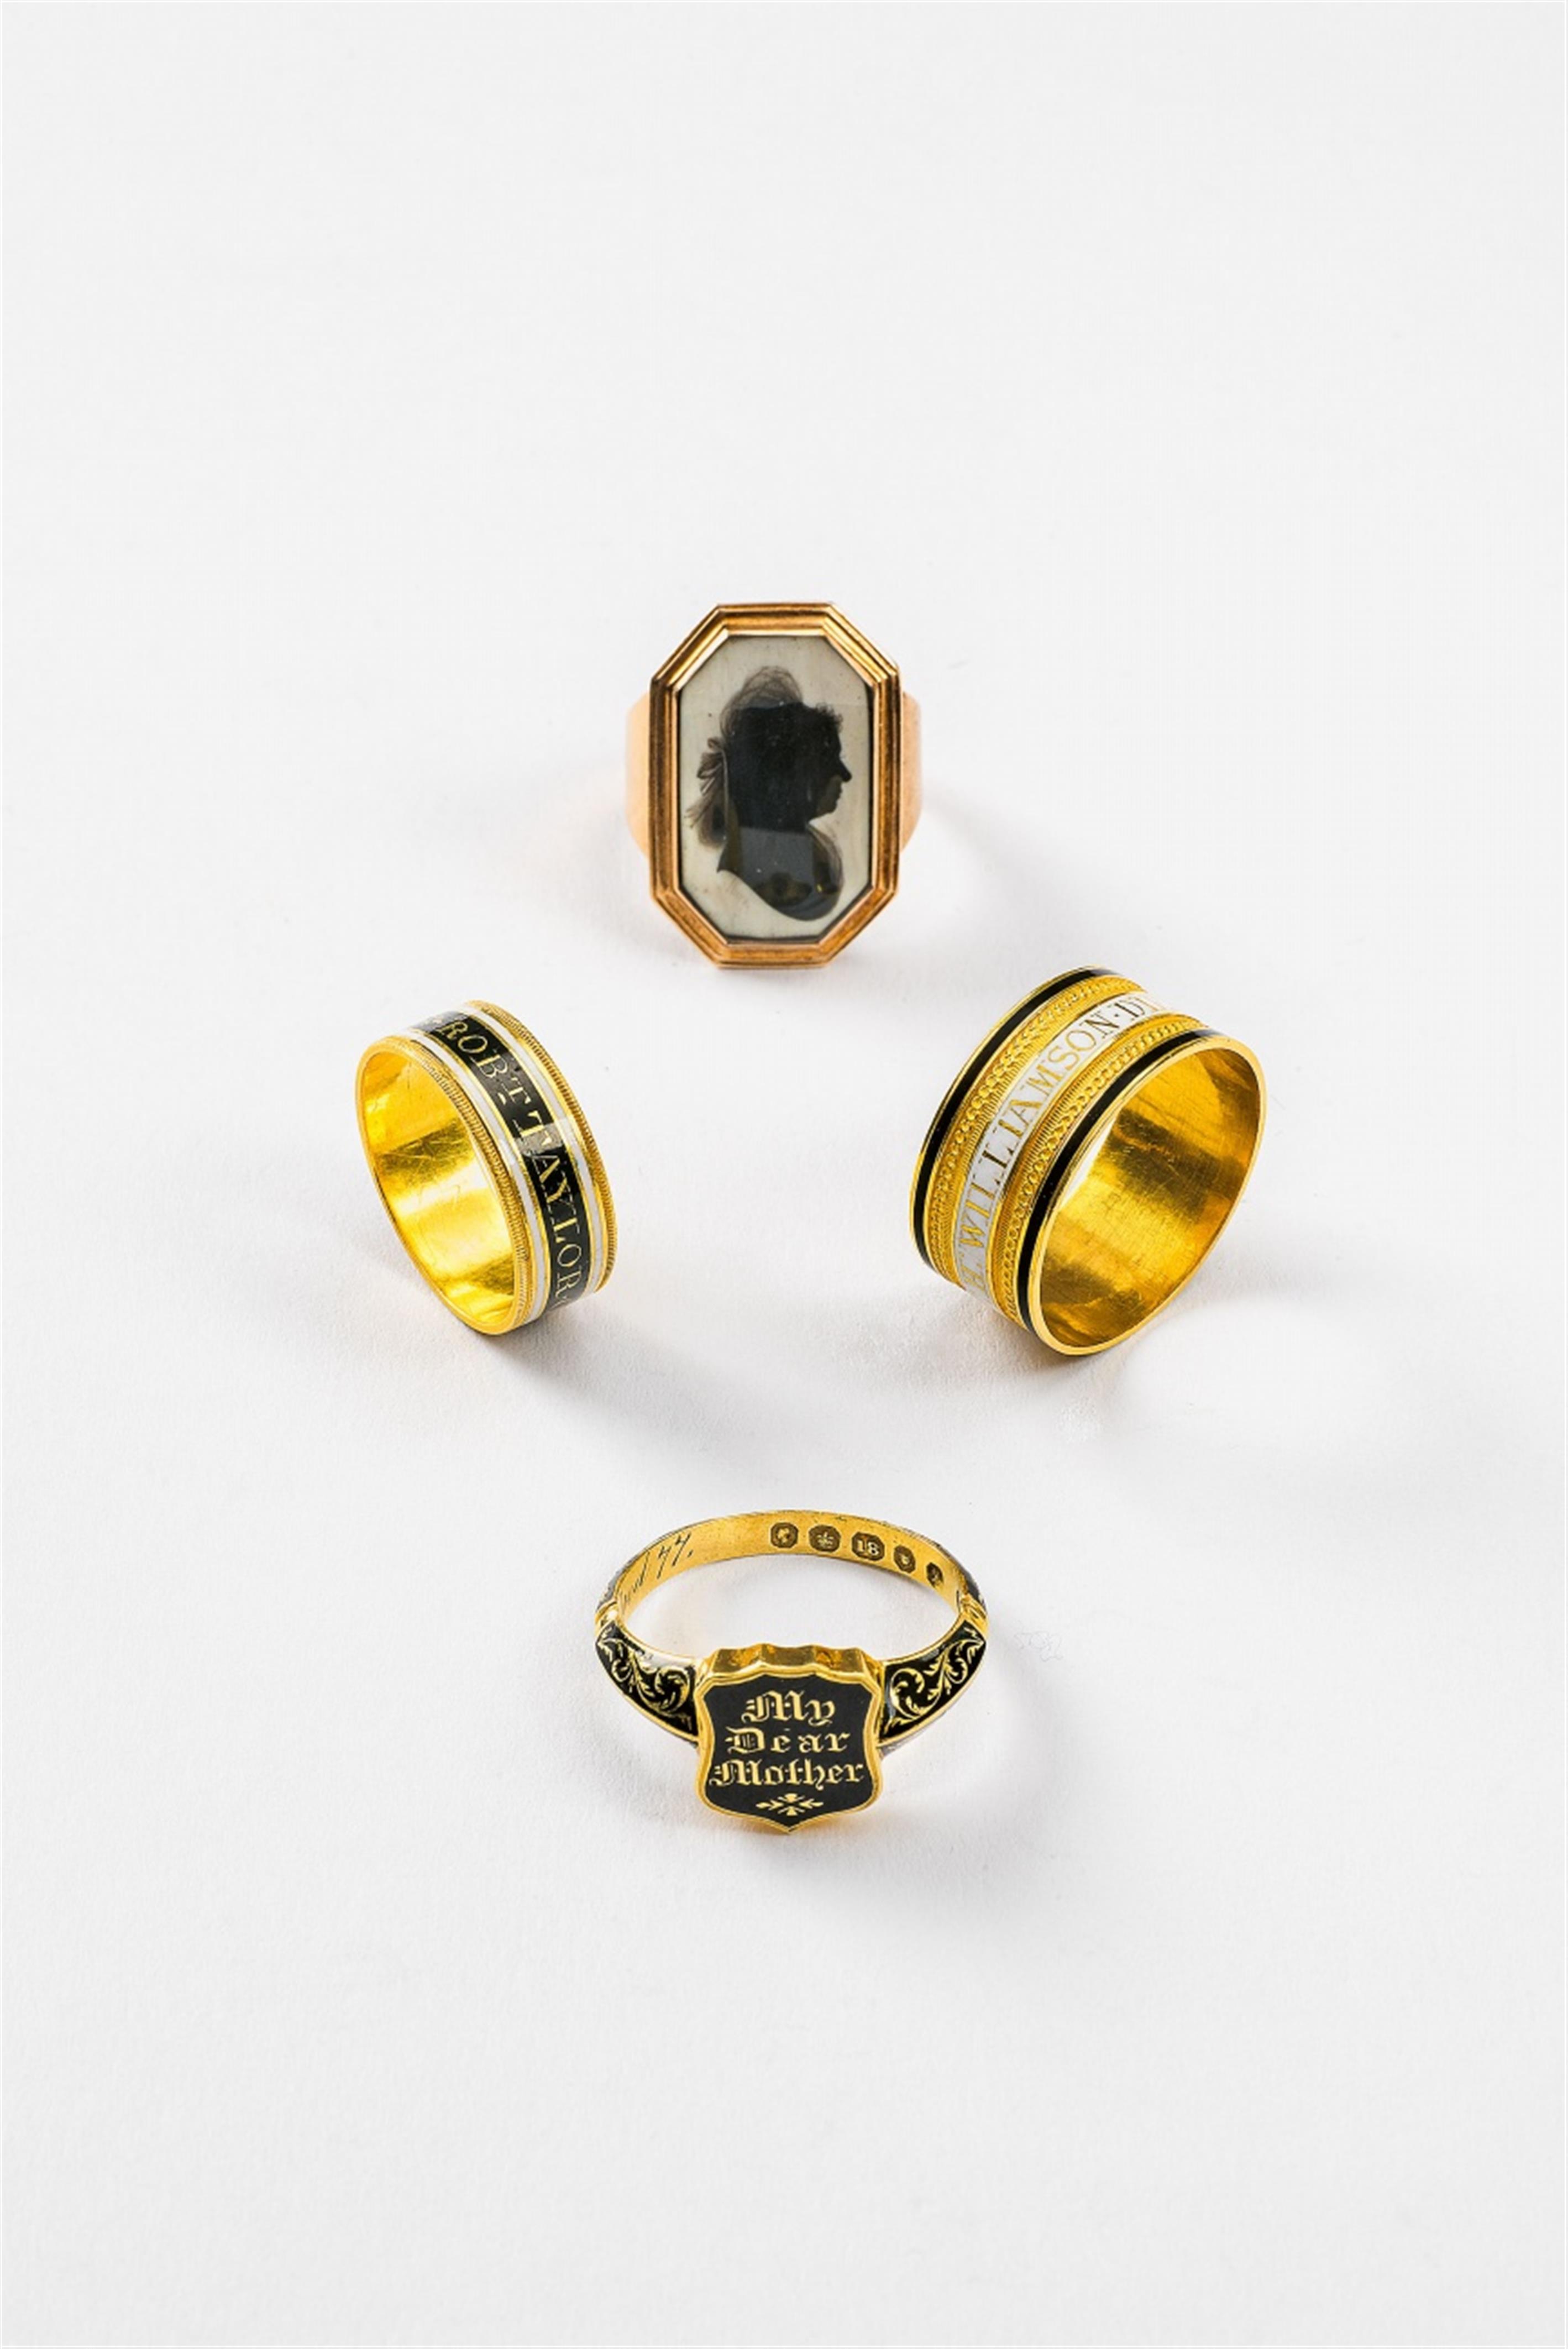 A Victorian 18k gold and enamel memory ring - image-2